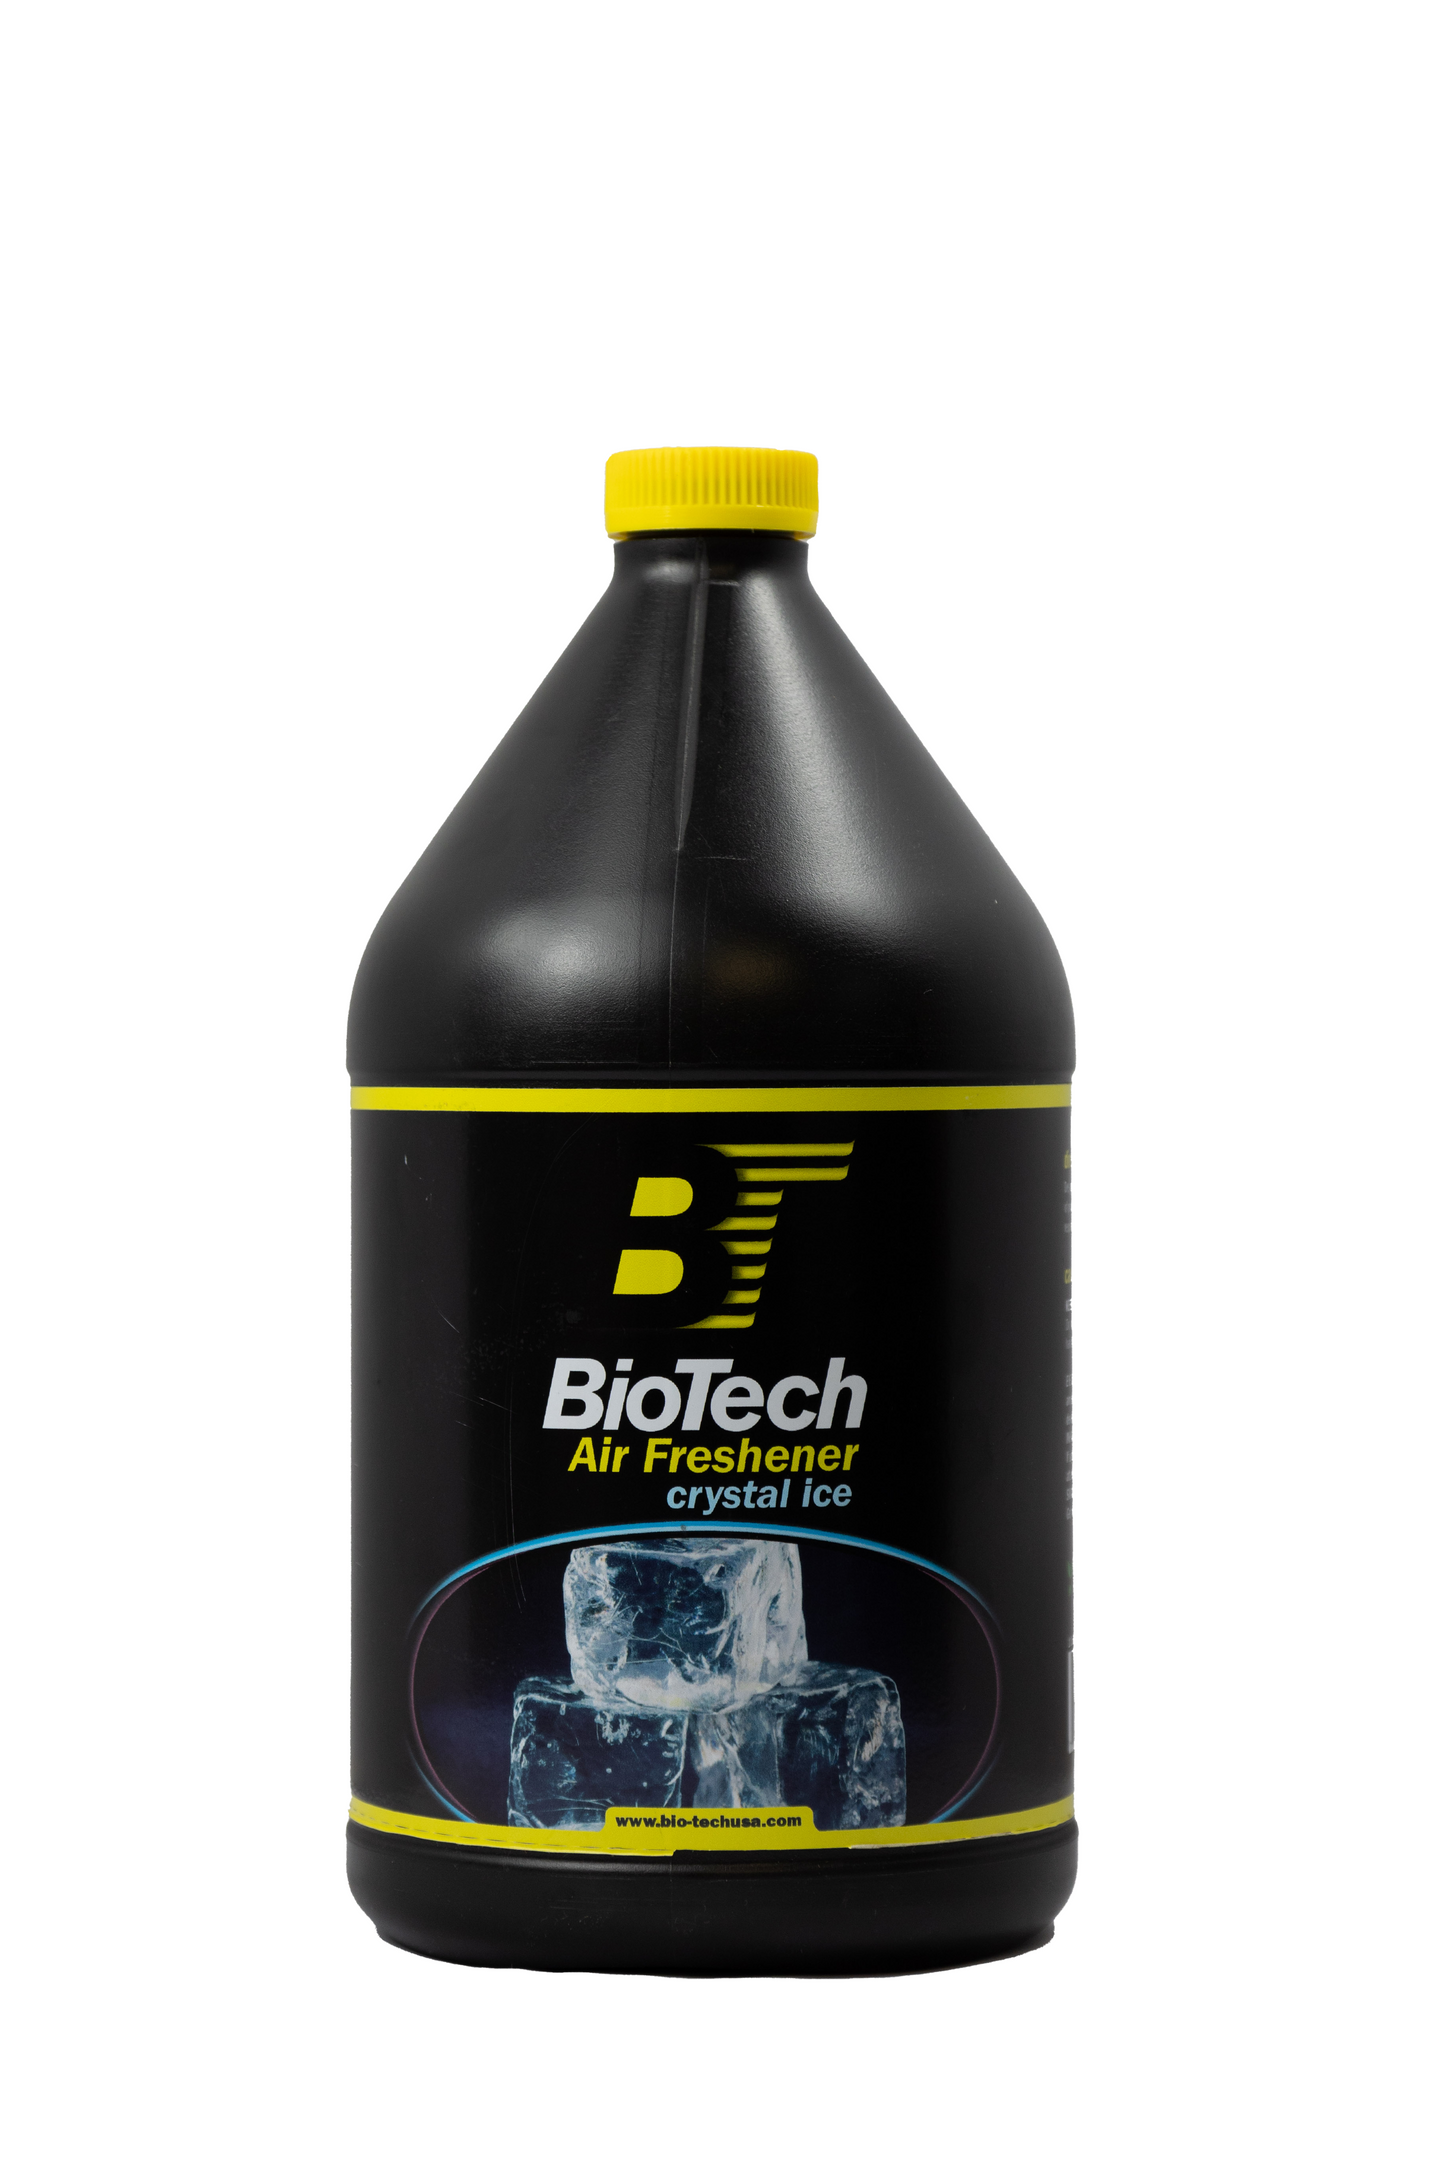 Biotech Air Freshener Crystal Ice Scent